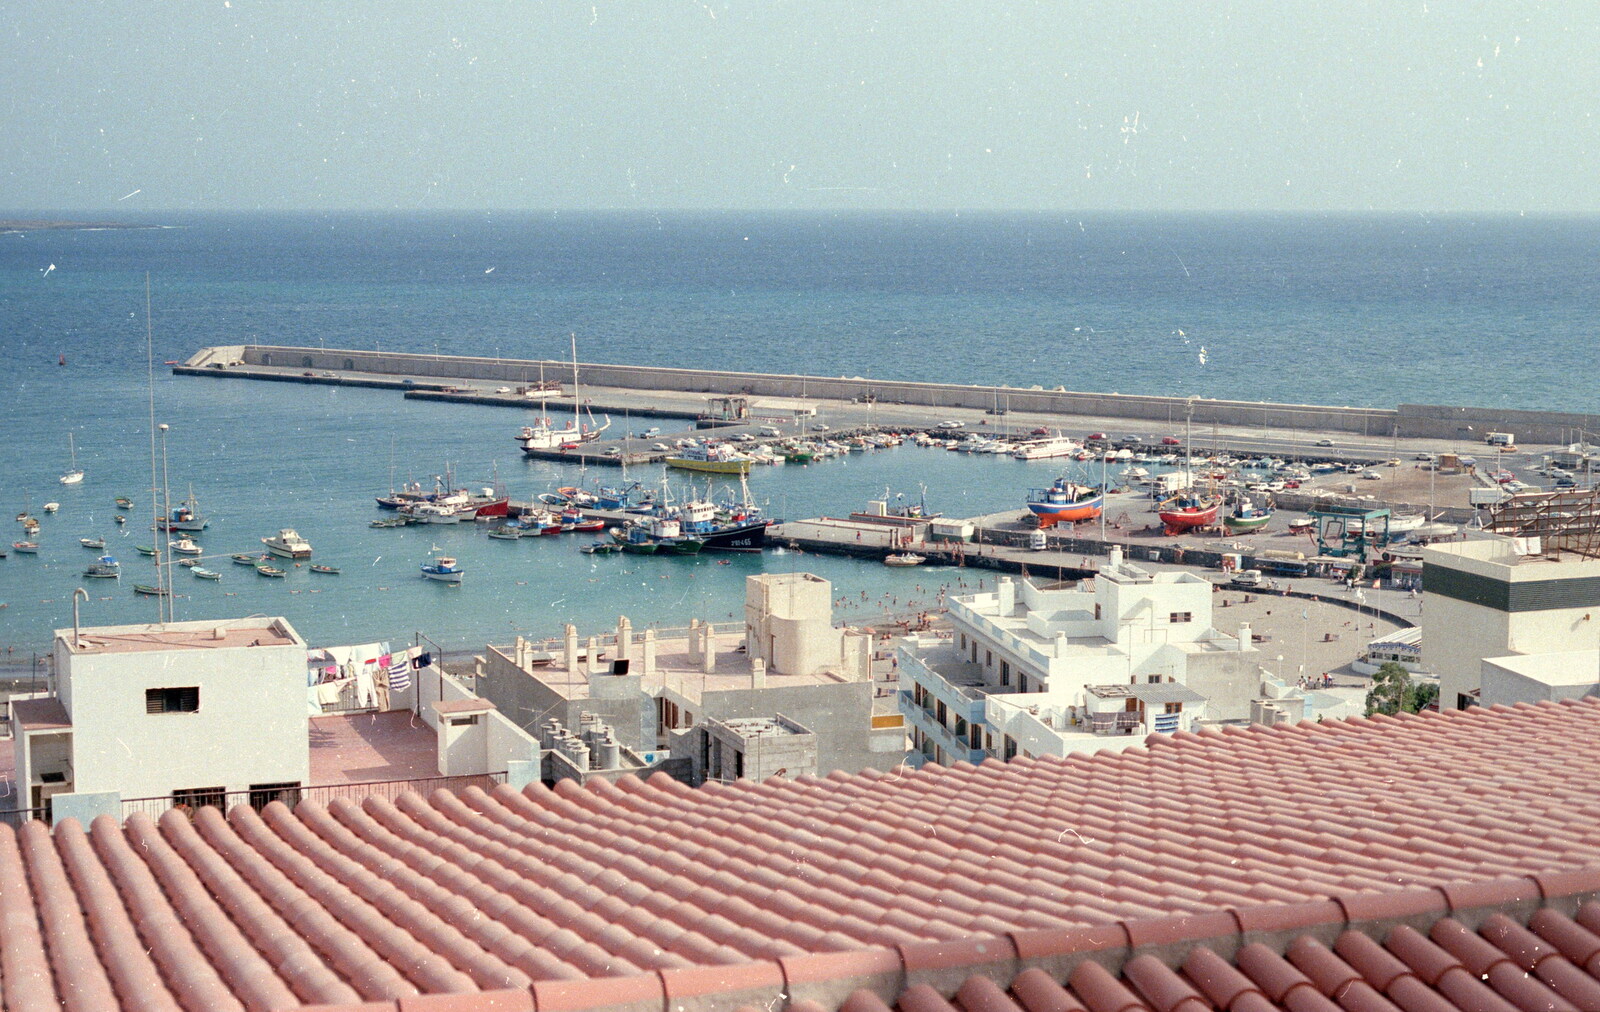 A view of the harbour from the apartment from A Holiday in Los Christianos, Tenerife - 19th June 1985